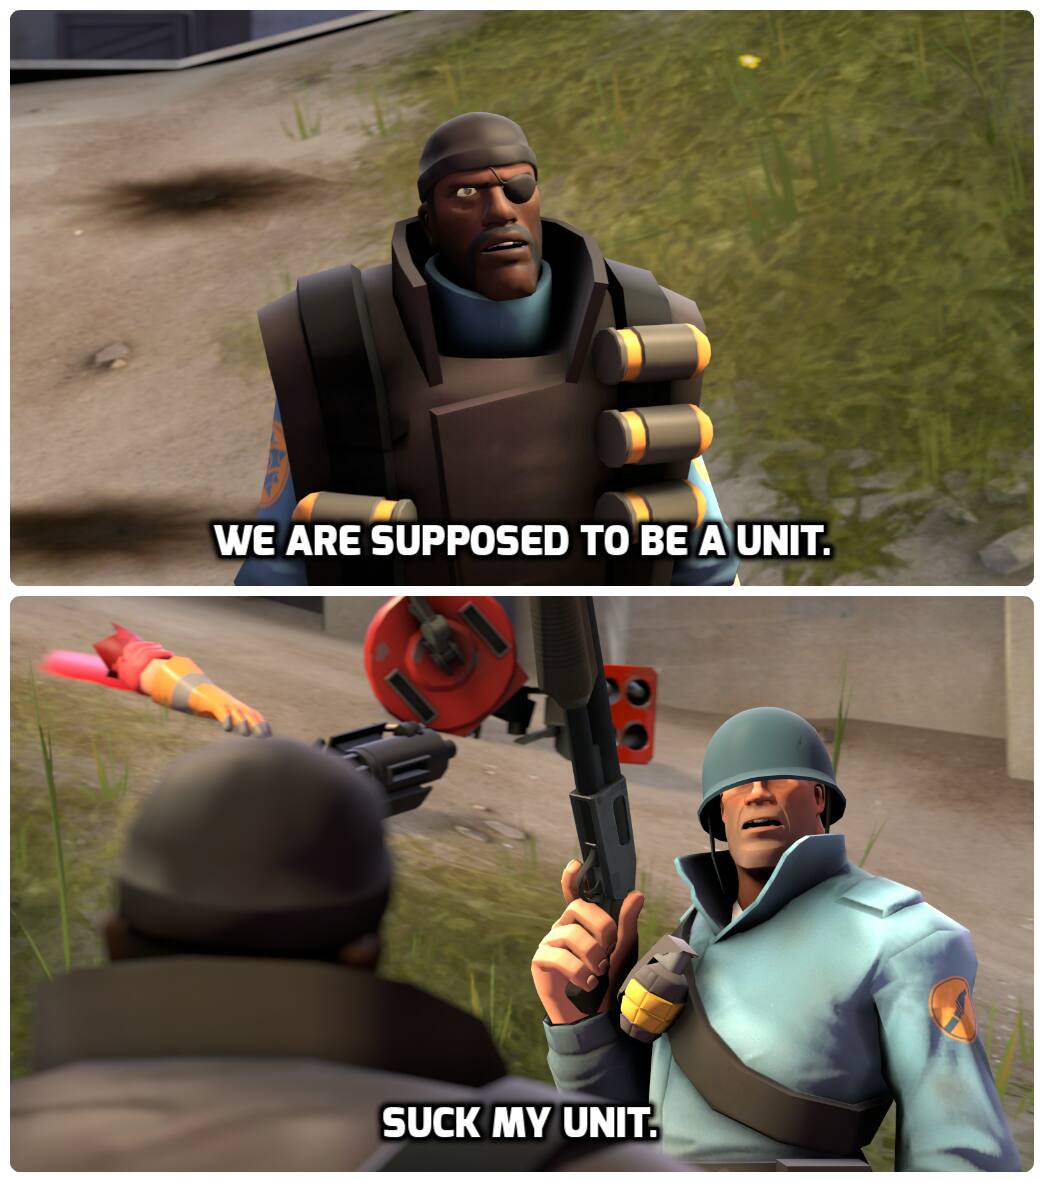 suck my unit tf2 - We Are Supposed To Be A Unit. Suck My Unit.